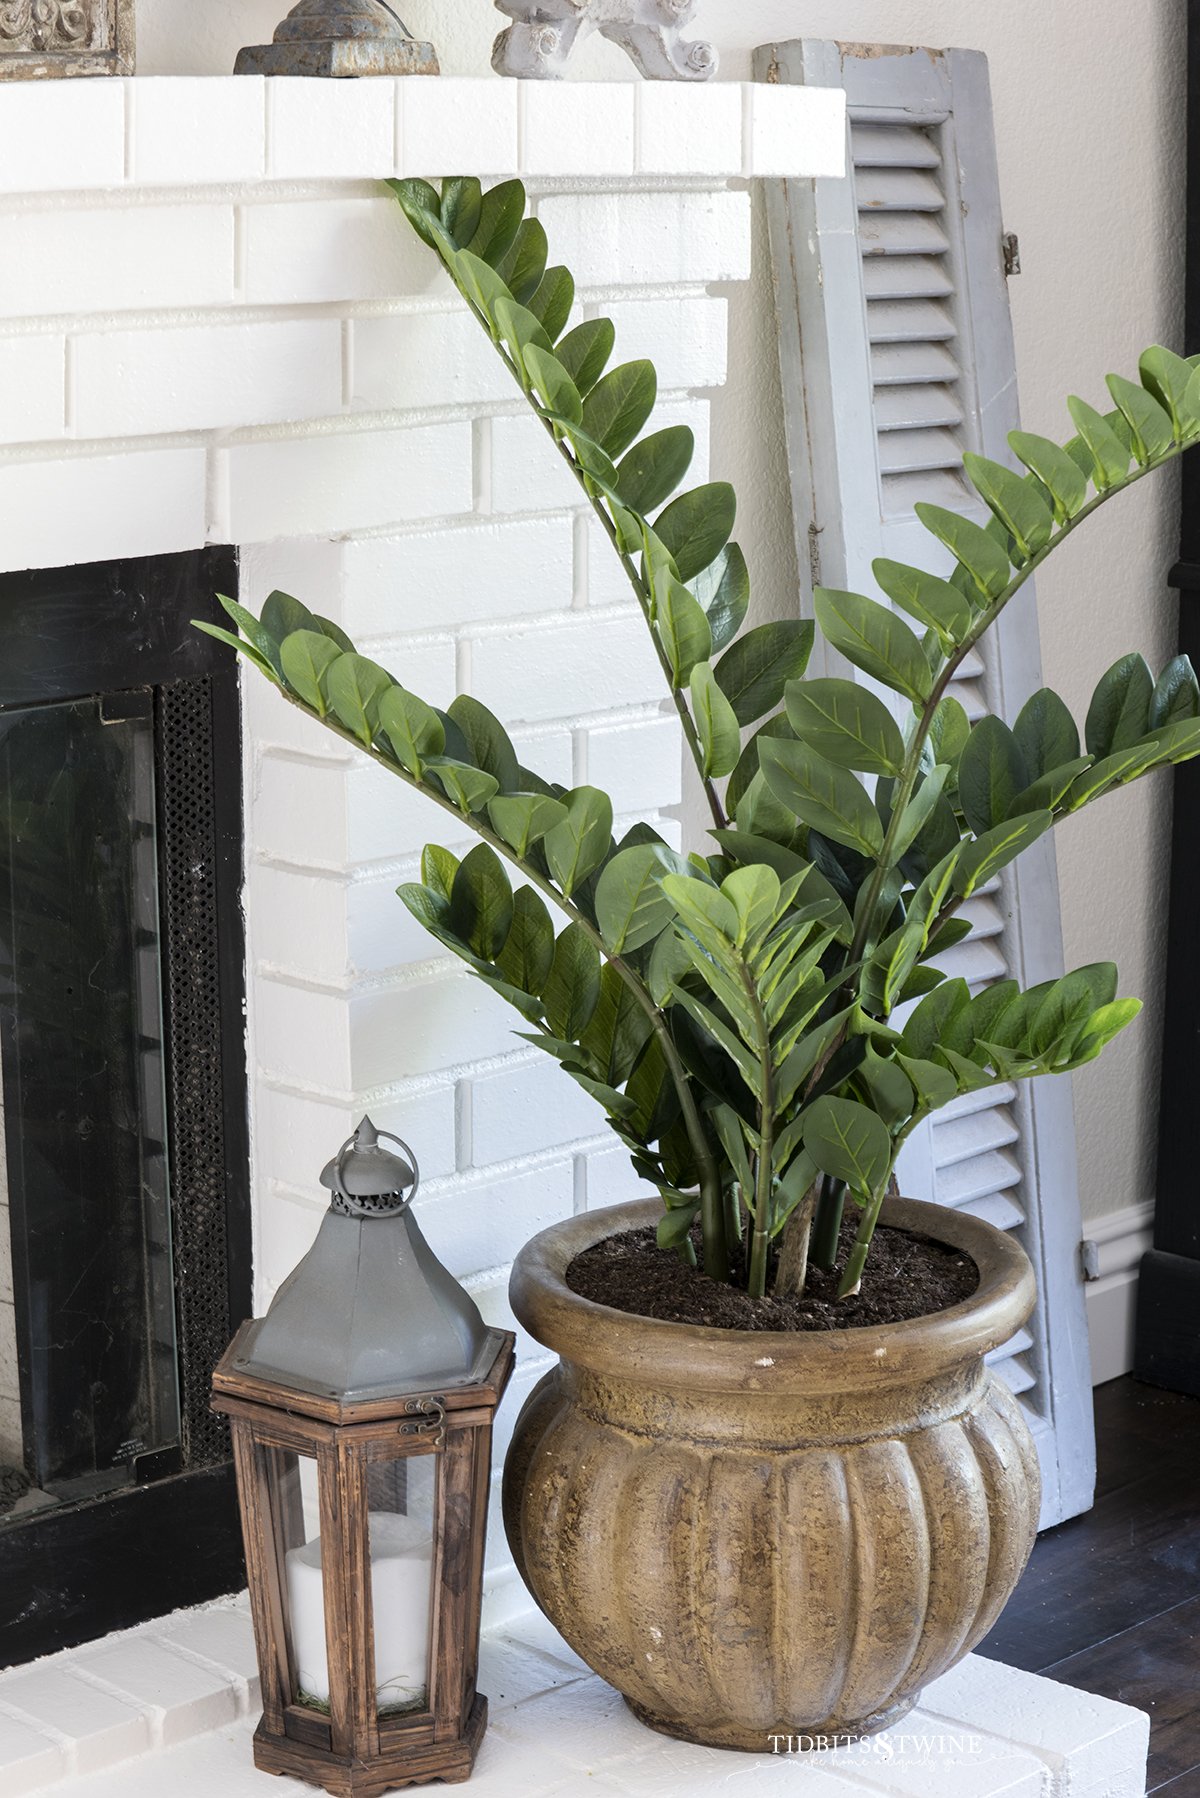 zz plant in a brown pot on white brick fireplace next to small lantern with blue shutter in background